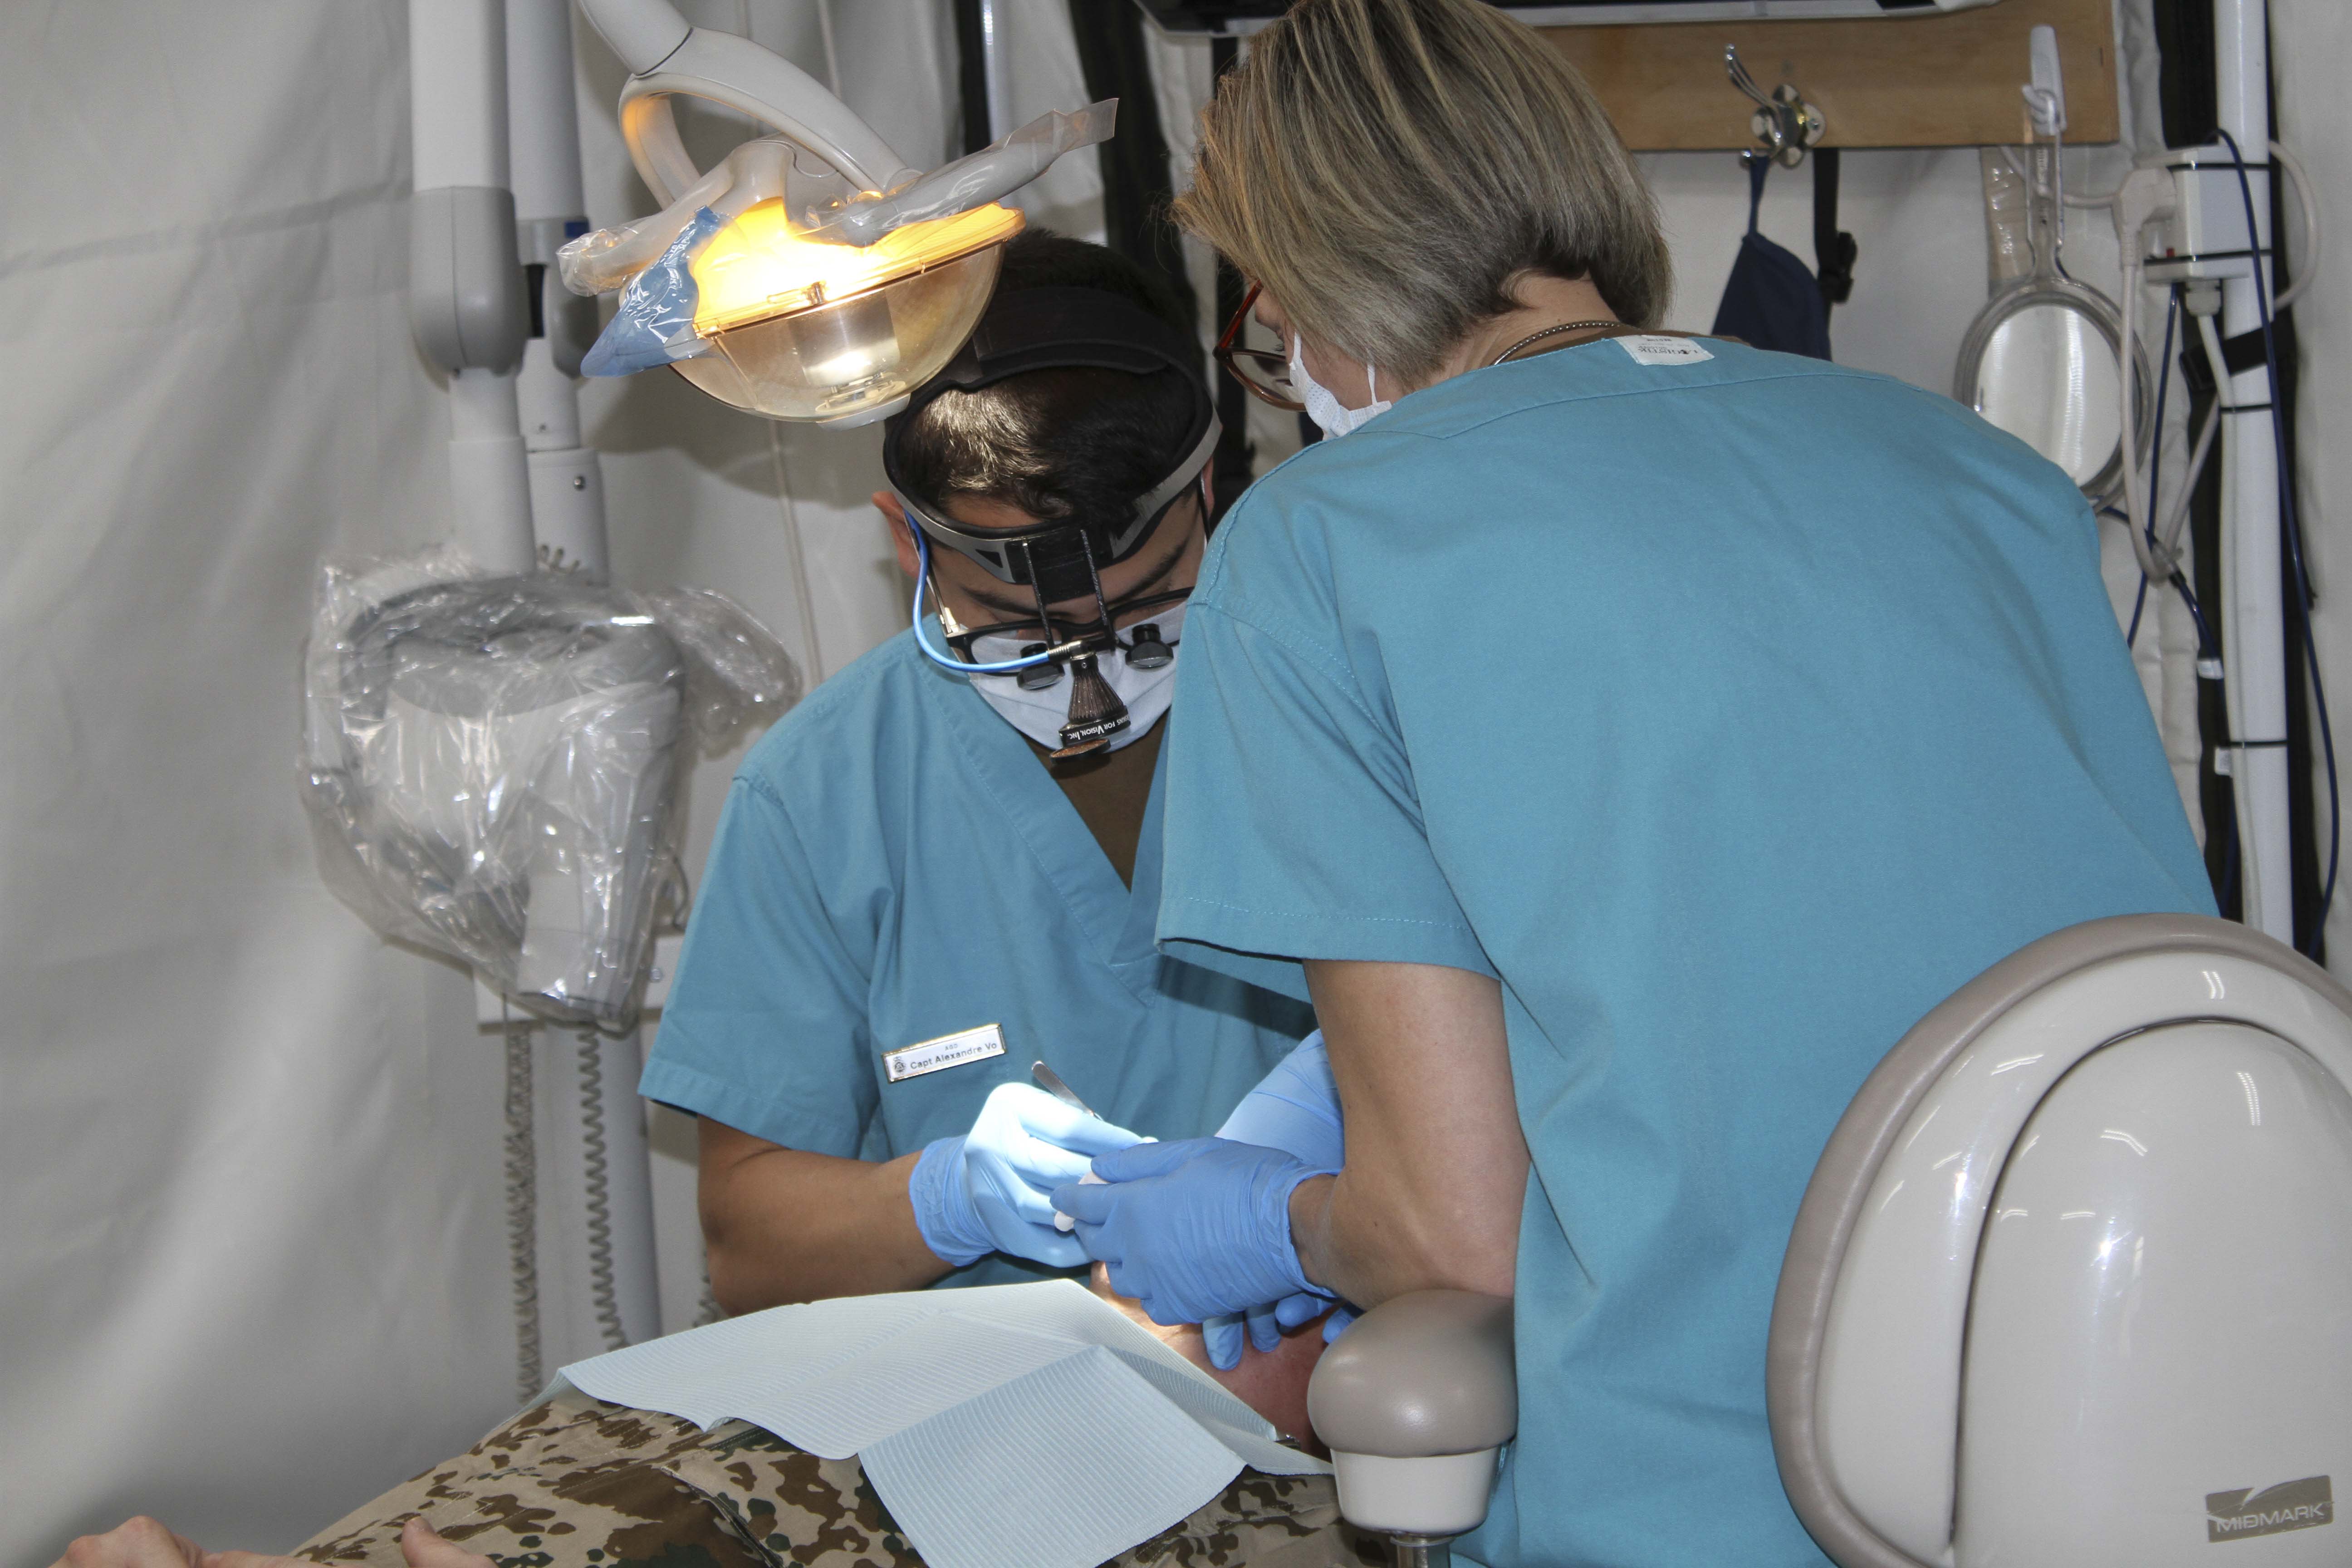 Canadian Armed Forces (CAF) dental officer Captain Huy-Bao Vo (Left) and CAF dental technician Sergeant Wendy Krause provide dental care at Joint Task Force –Iraq’s Role 2 Hospital in Erbil Iraq in early January 2019. Image by:  Op IMPACT Imaging